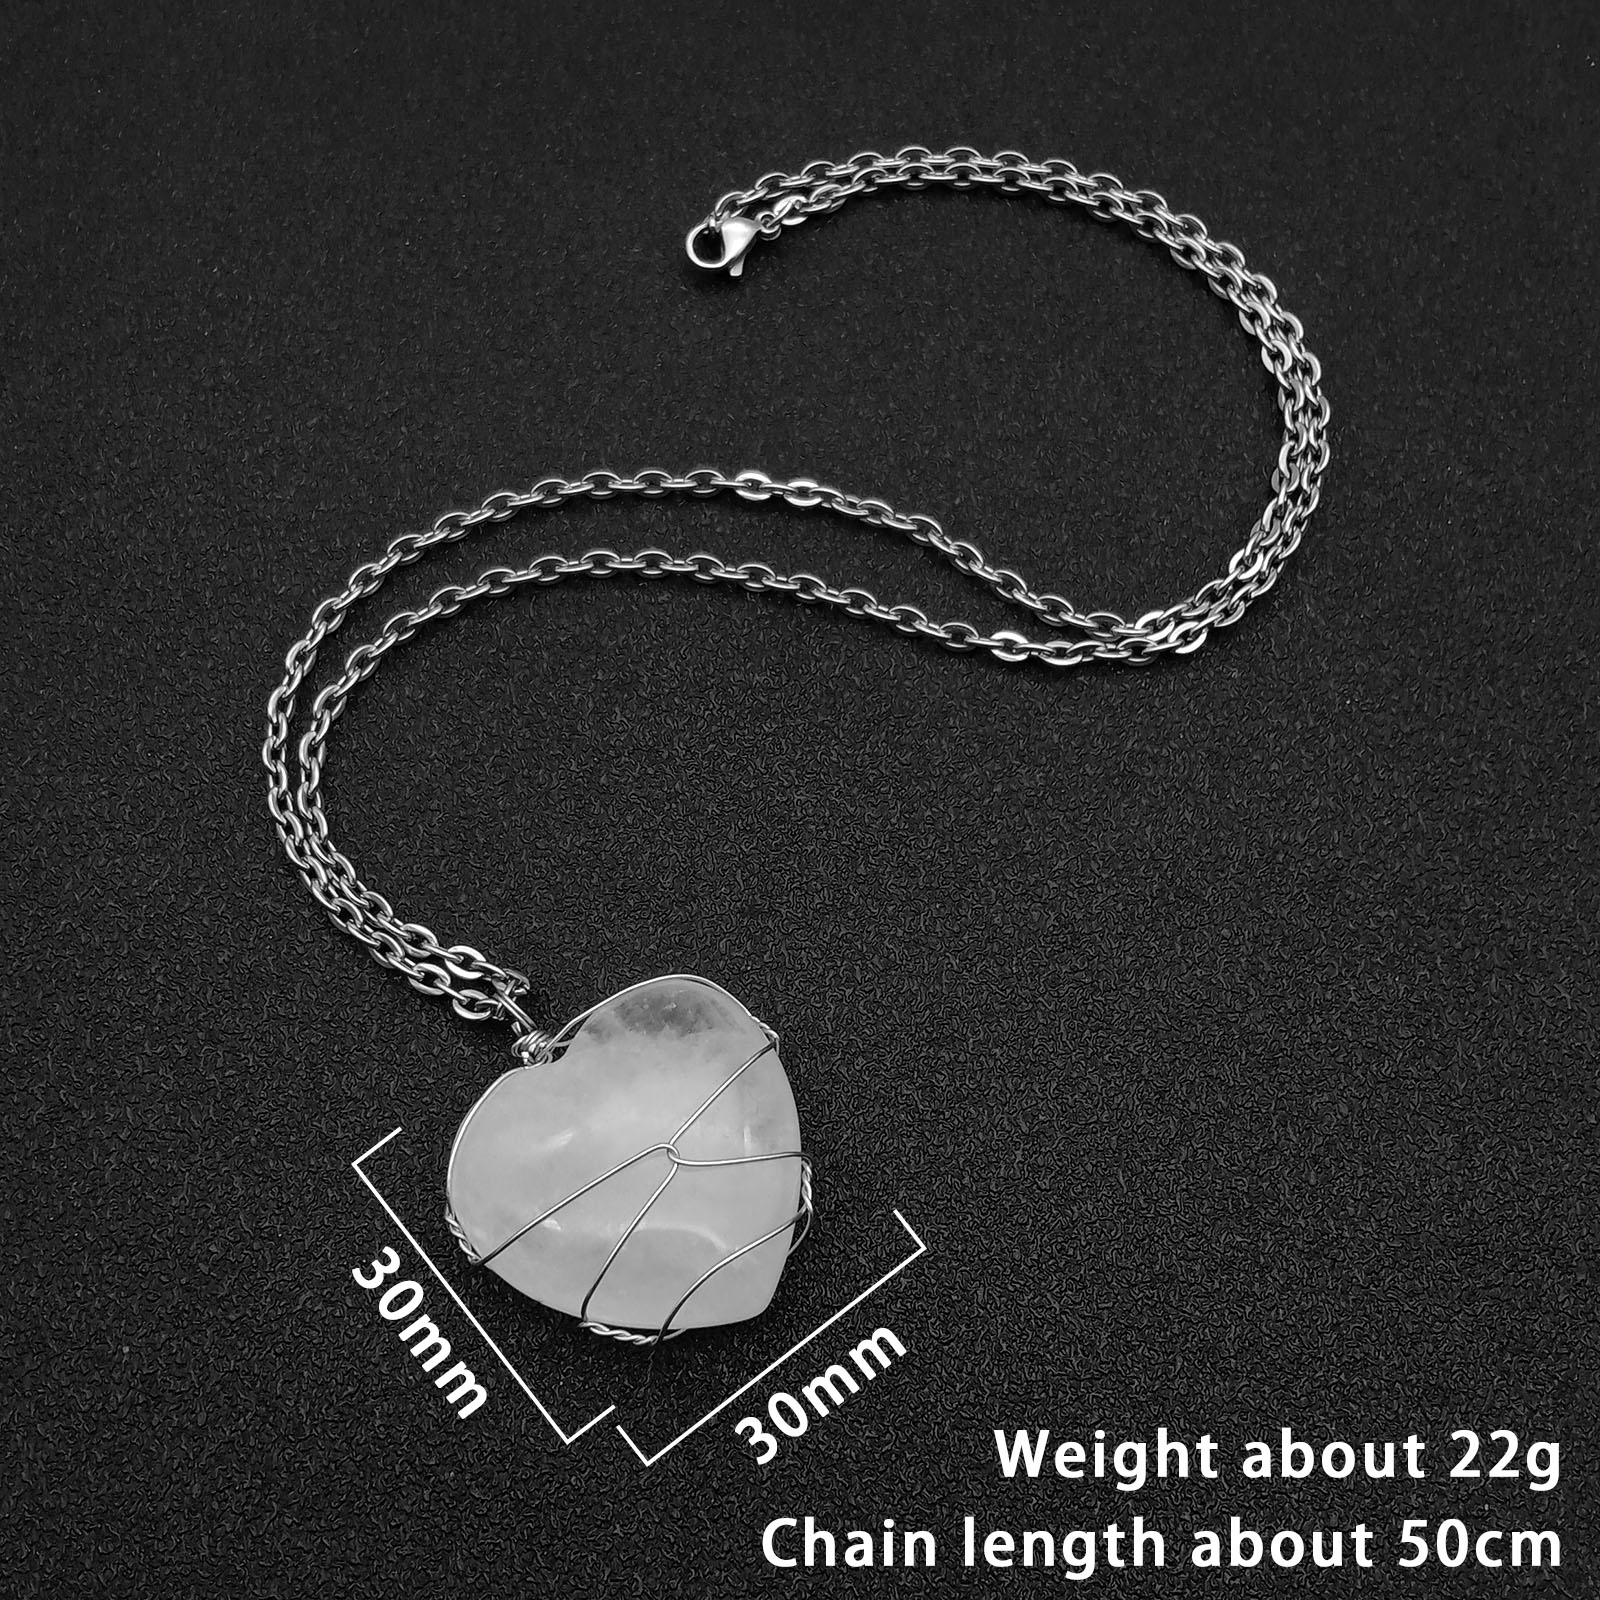 The pendant is about 30mm long, about 30mm high, and the chain is about 50cm long